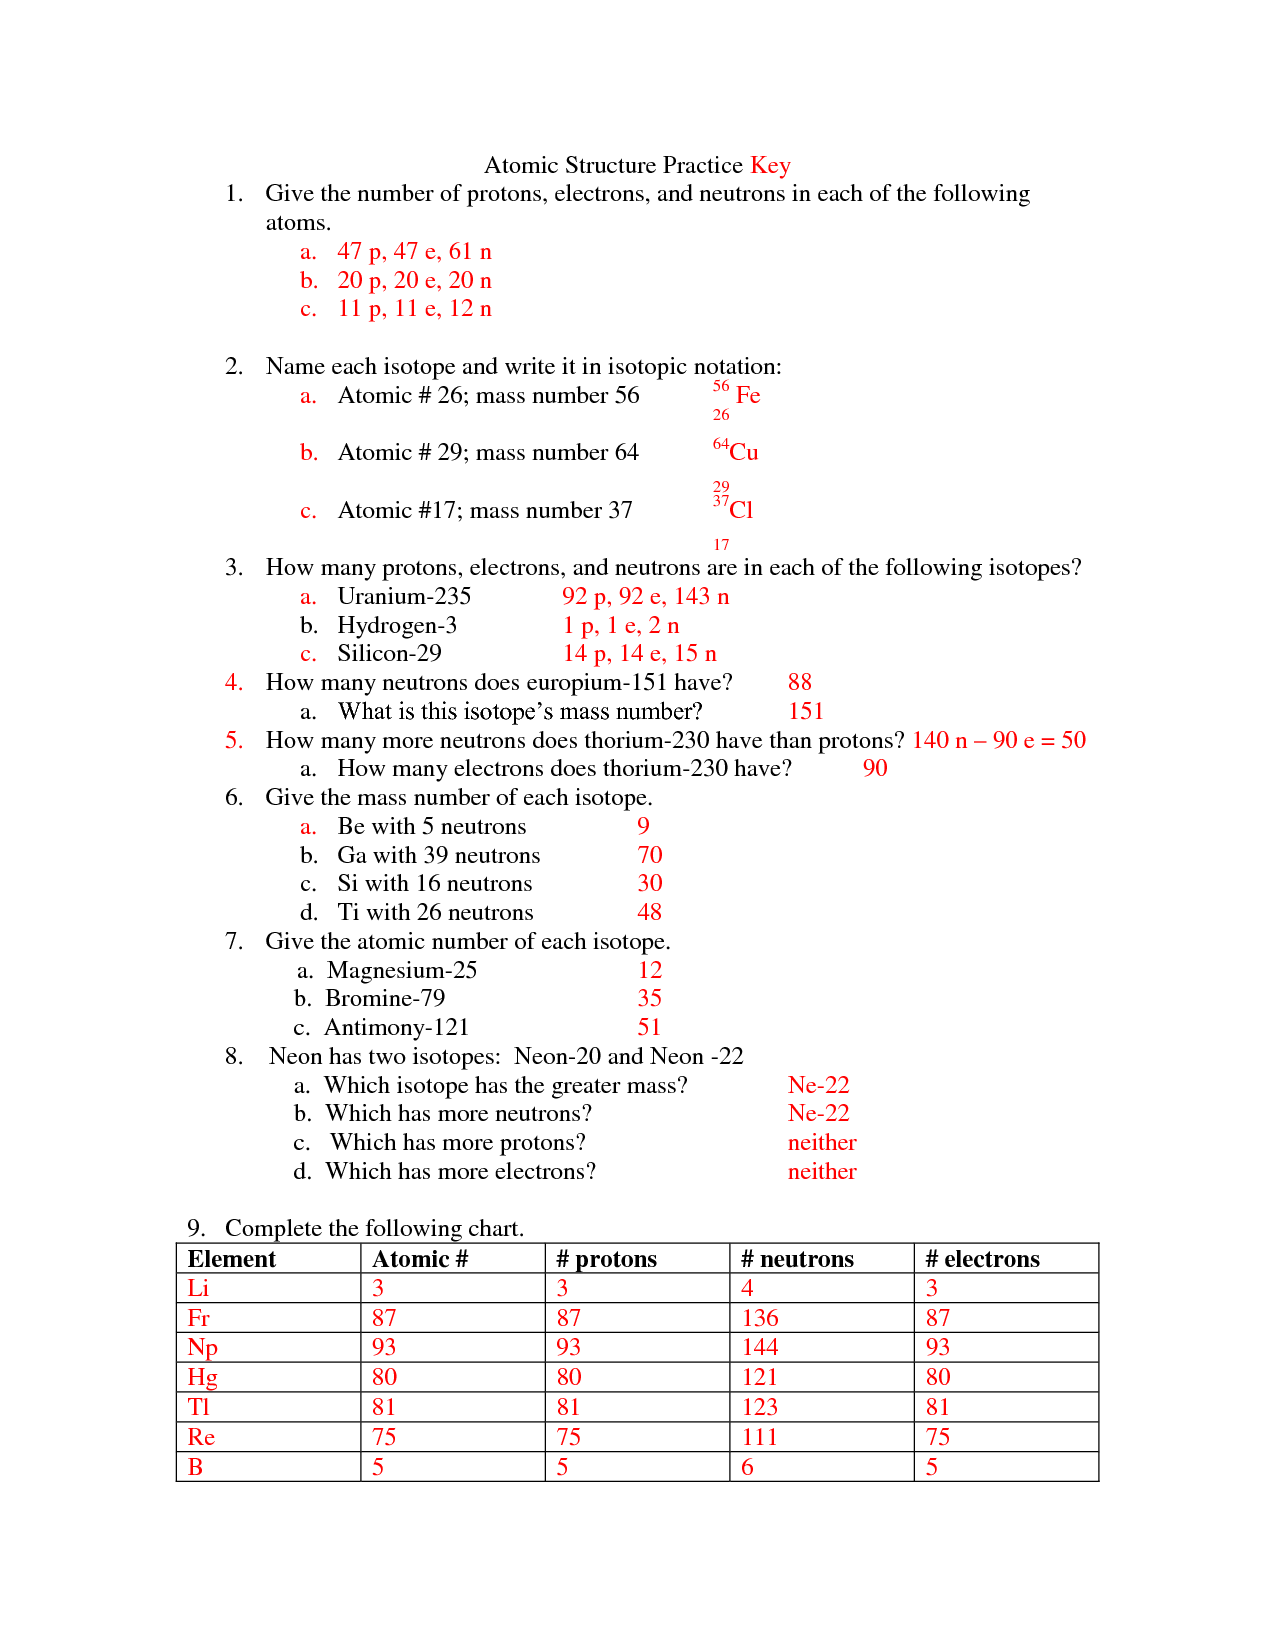 15 Best Images of Nuclear Chemistry Worksheet Answer Key  Nuclear Decay Worksheet Answer Key 